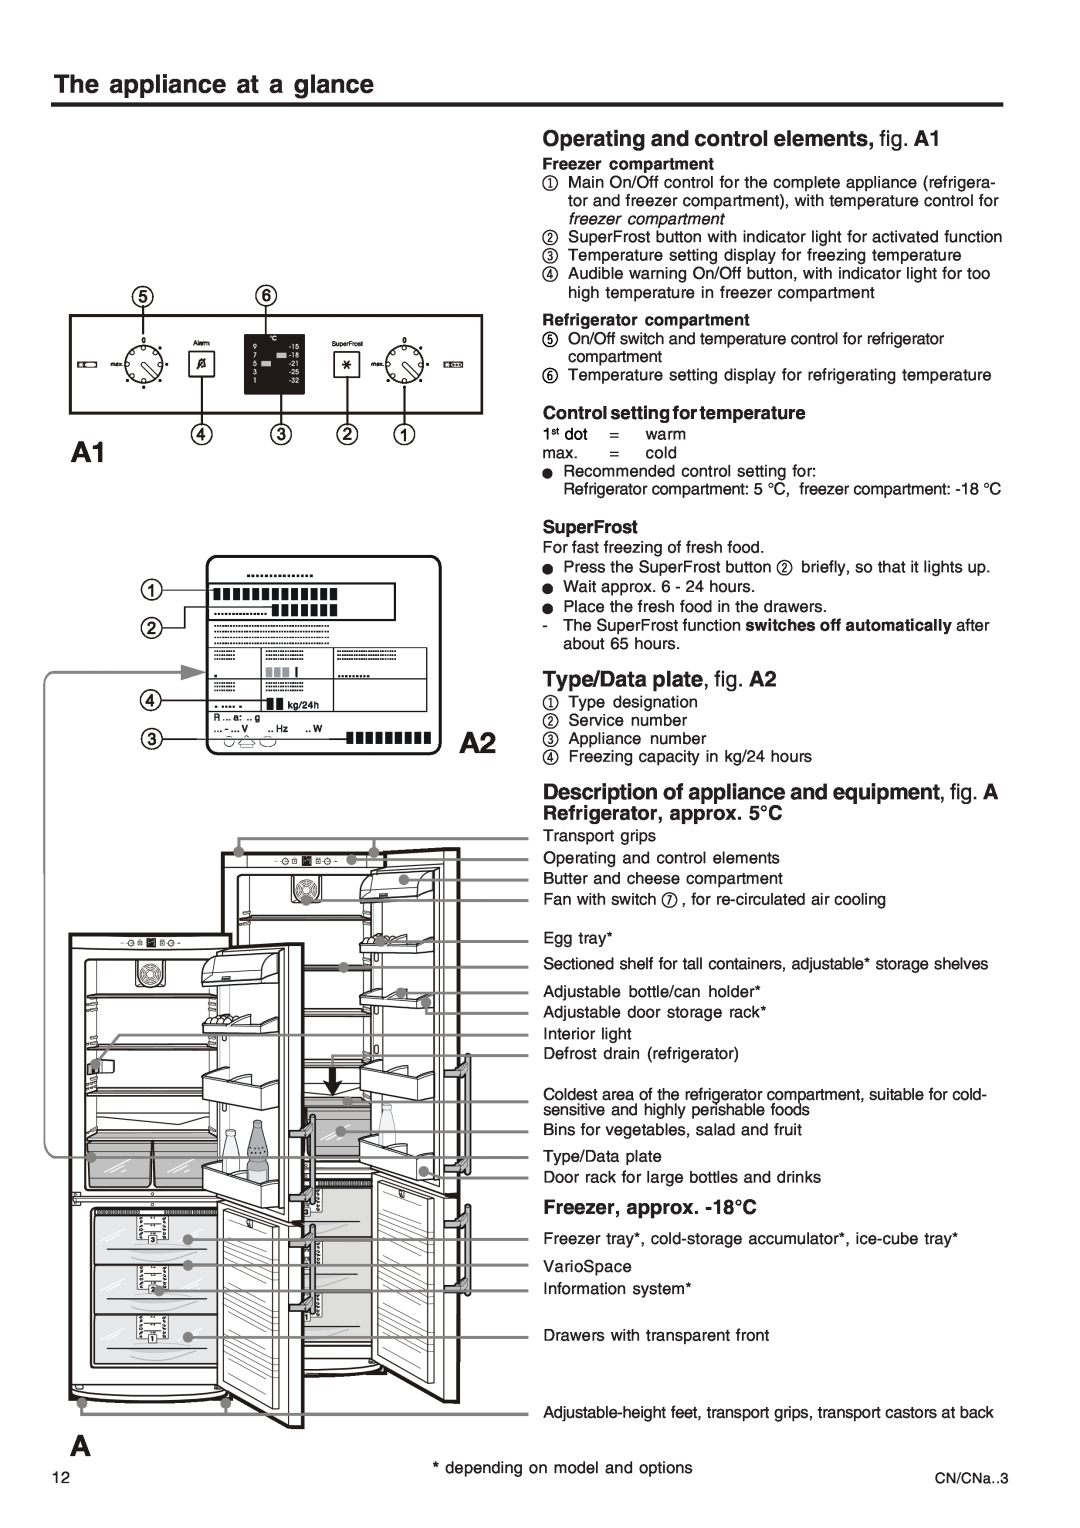 Liebherr 7082 224-00 manual The appliance at a glance, Operating and control elements, fig. A1, Type/Data plate, fig. A2 